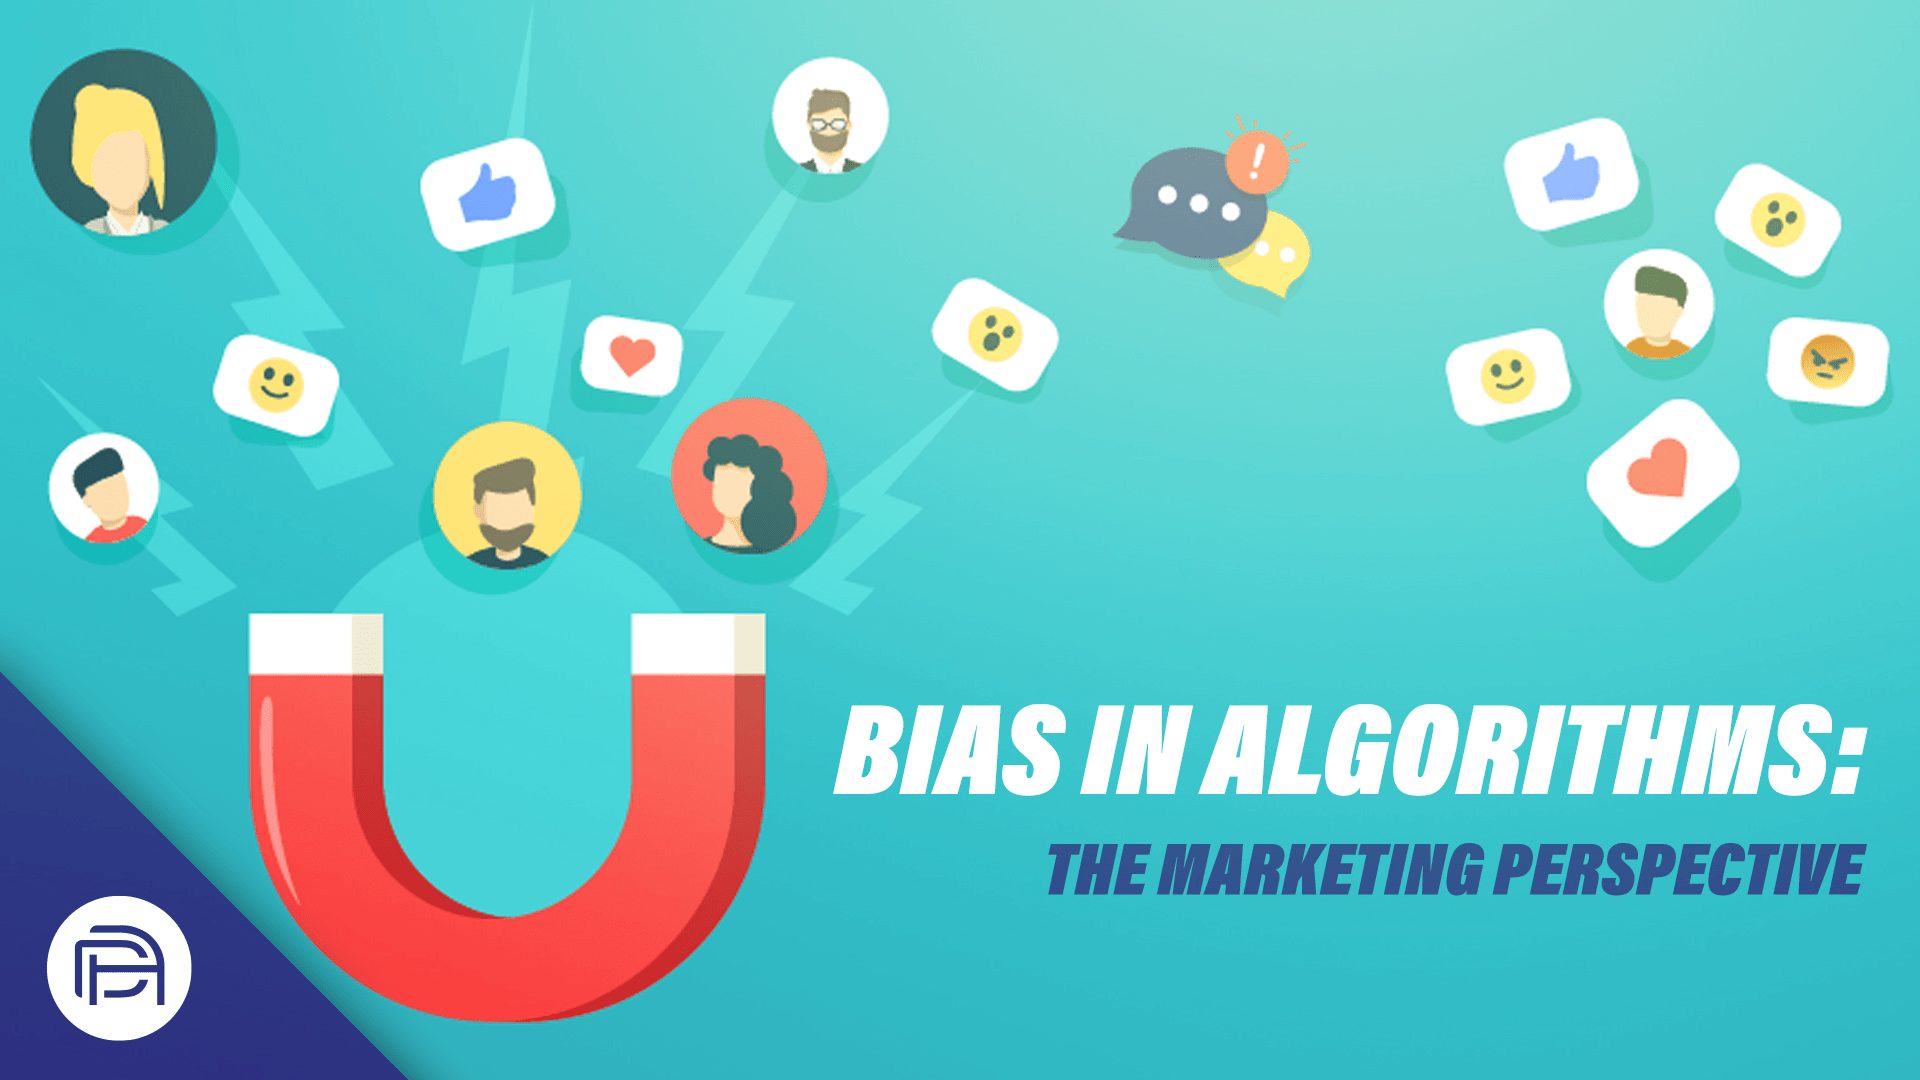 Bias in Algorithms: The Marketing Perspective